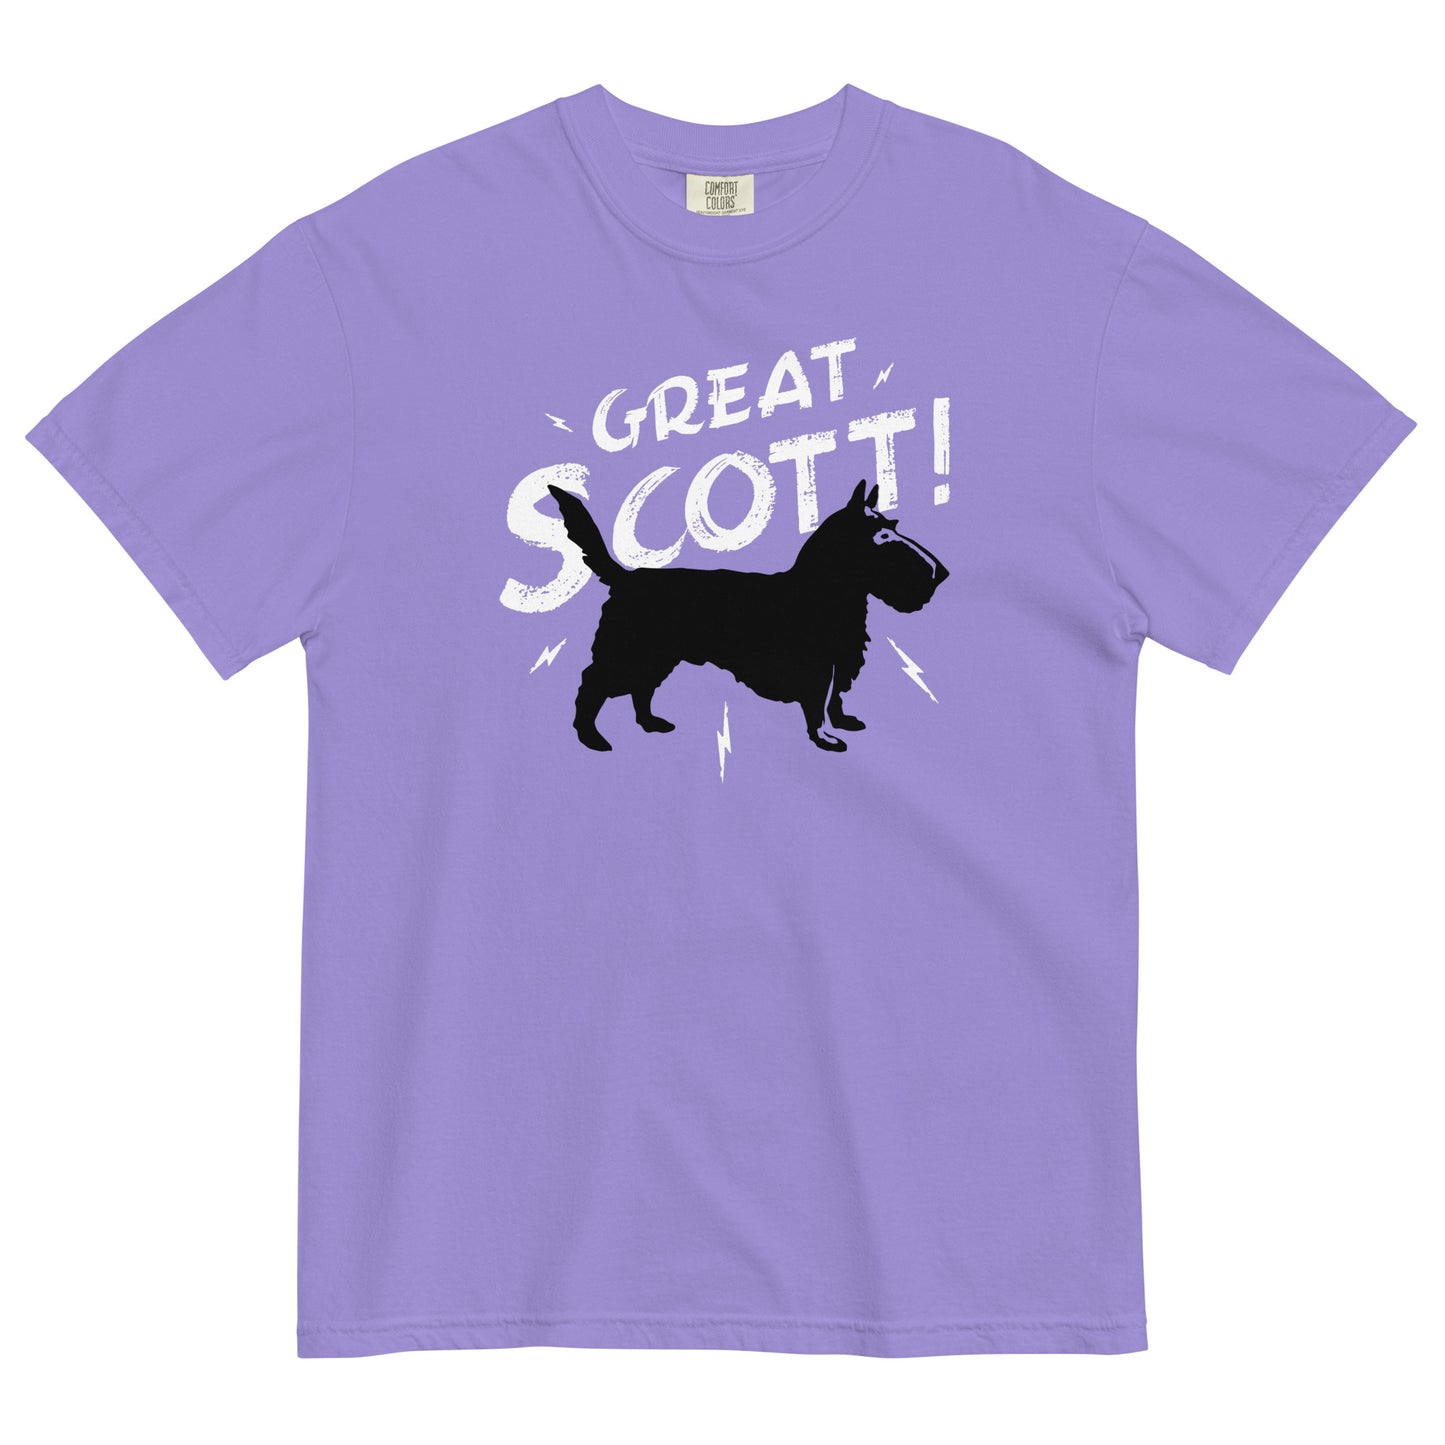 Great Scott! Men's Relaxed Fit Tee